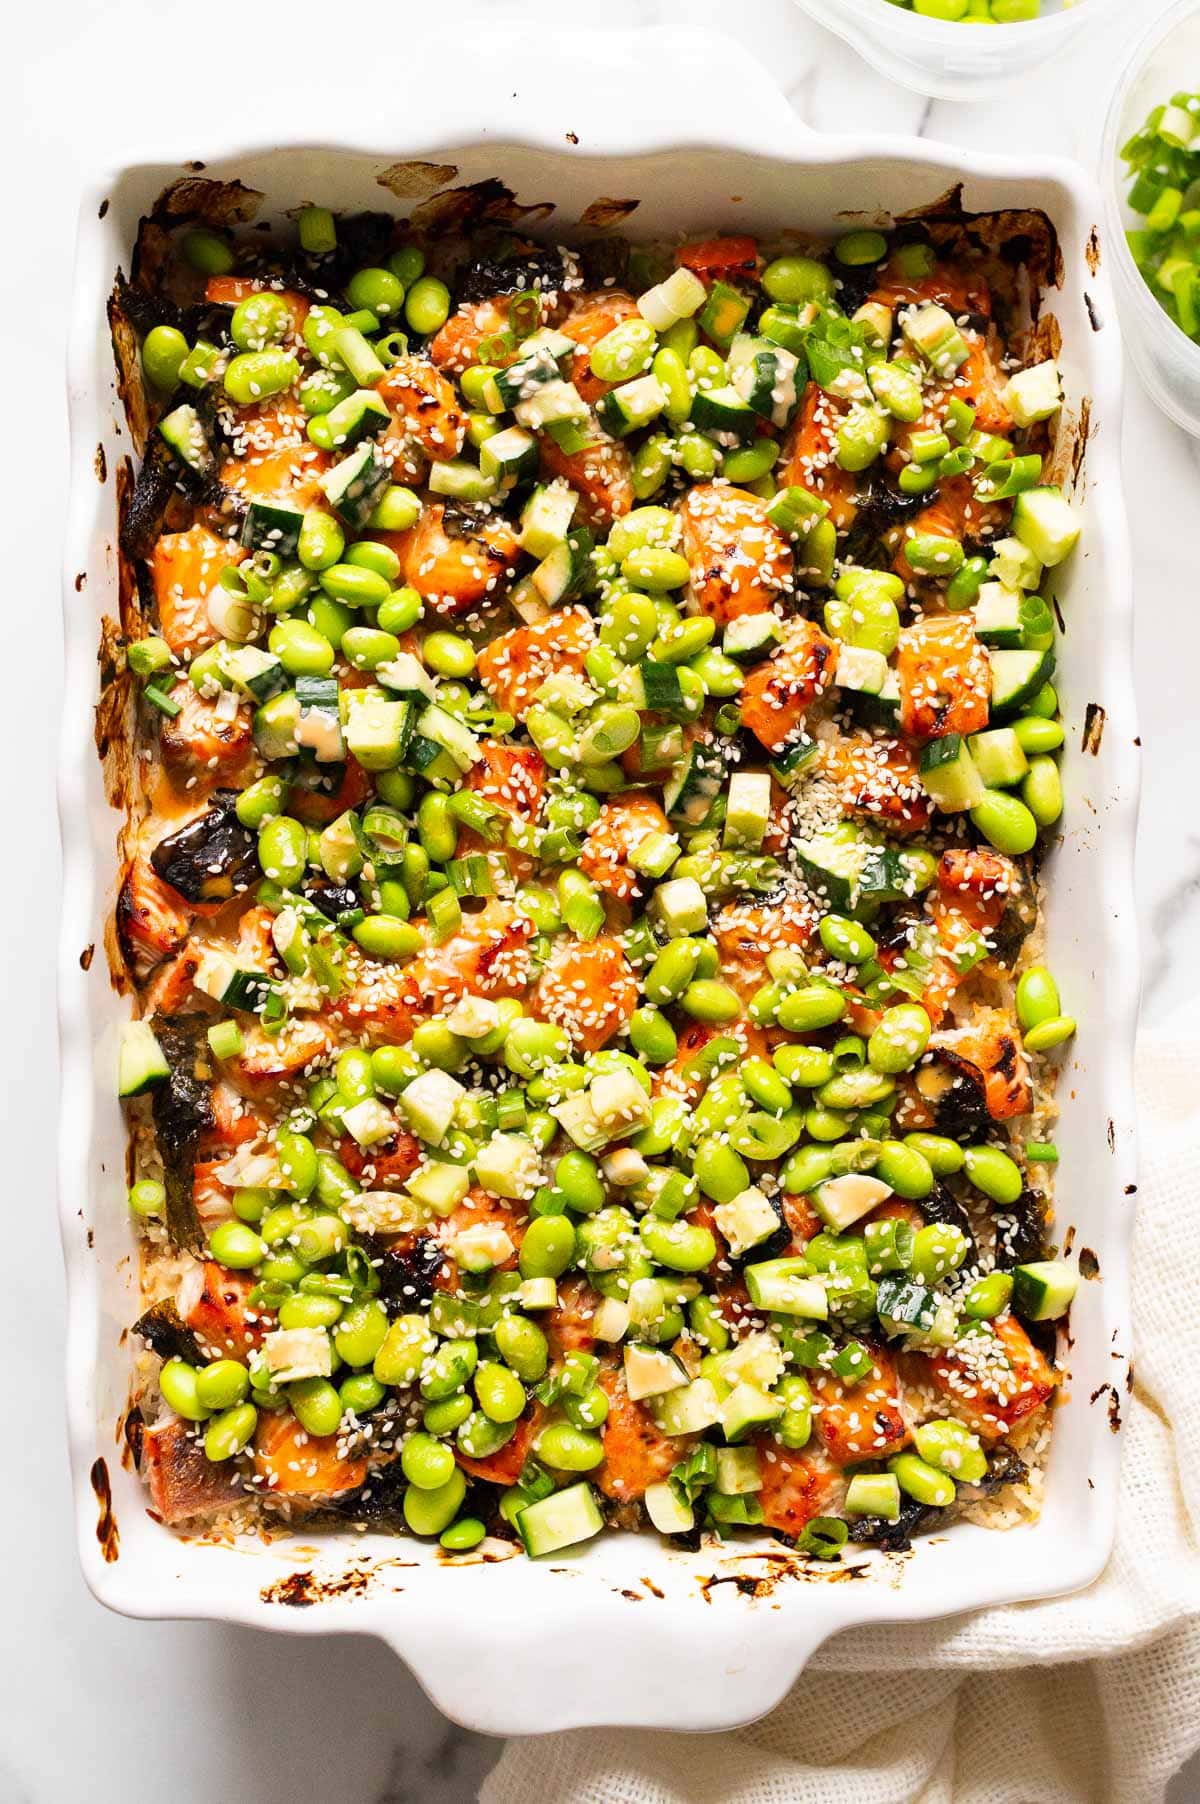 Salmon sushi bake with edamame beans, cucumber, green onion and sesame seeds in a baking dish.